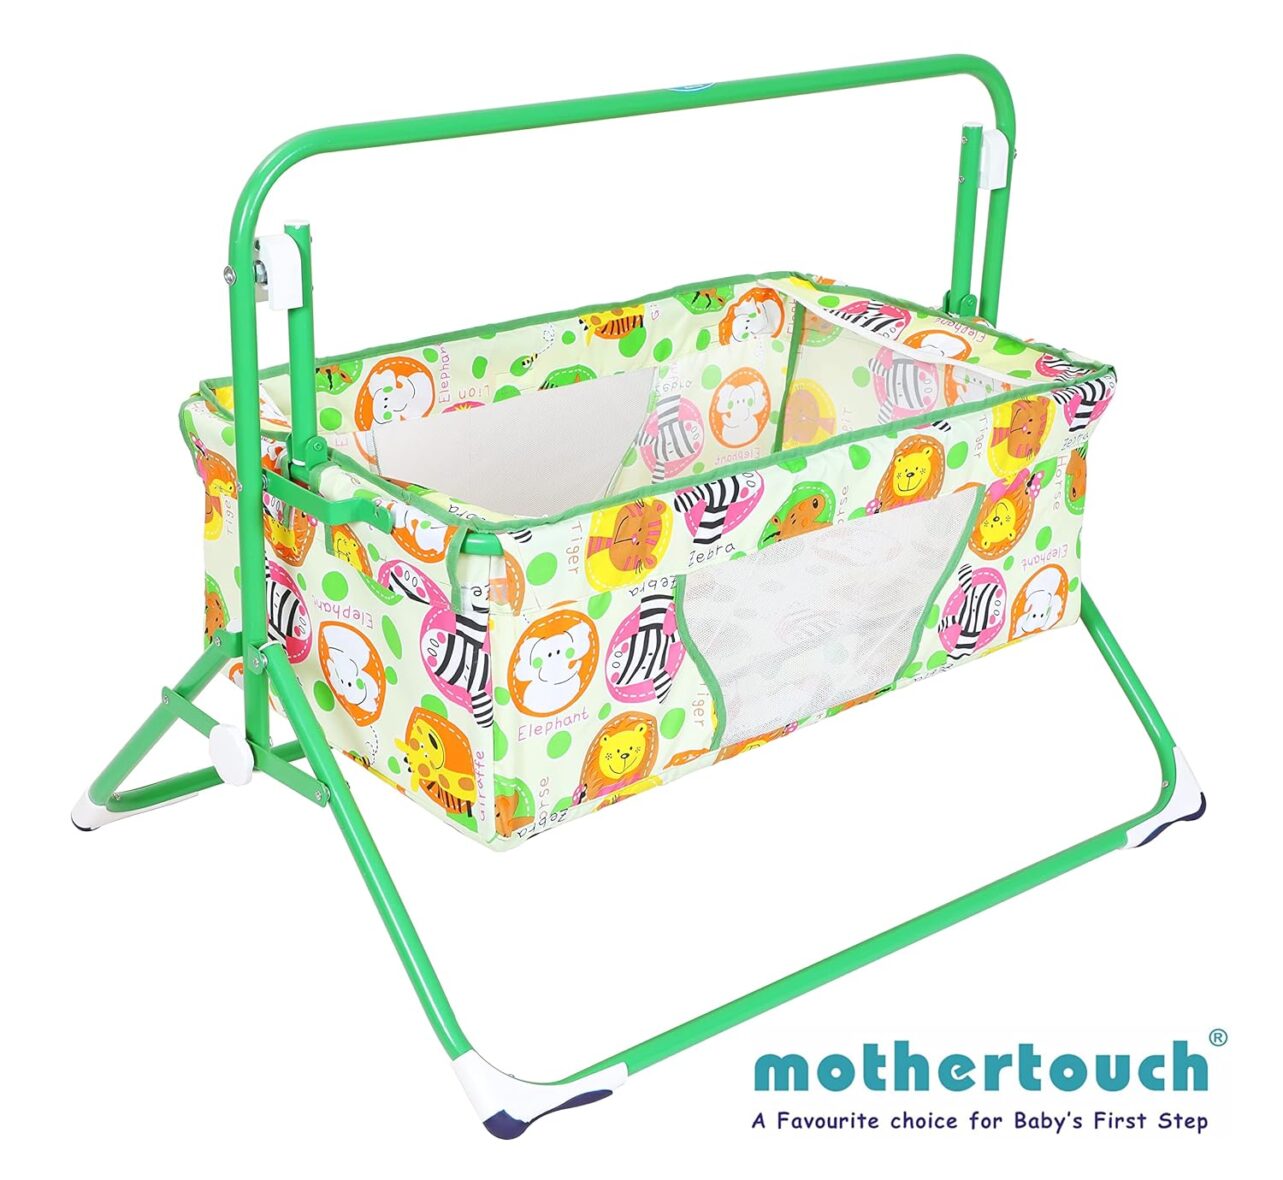 Mothertouch Wonder Cradle: A Secure and Comfortable Sleep Solution for Your Baby